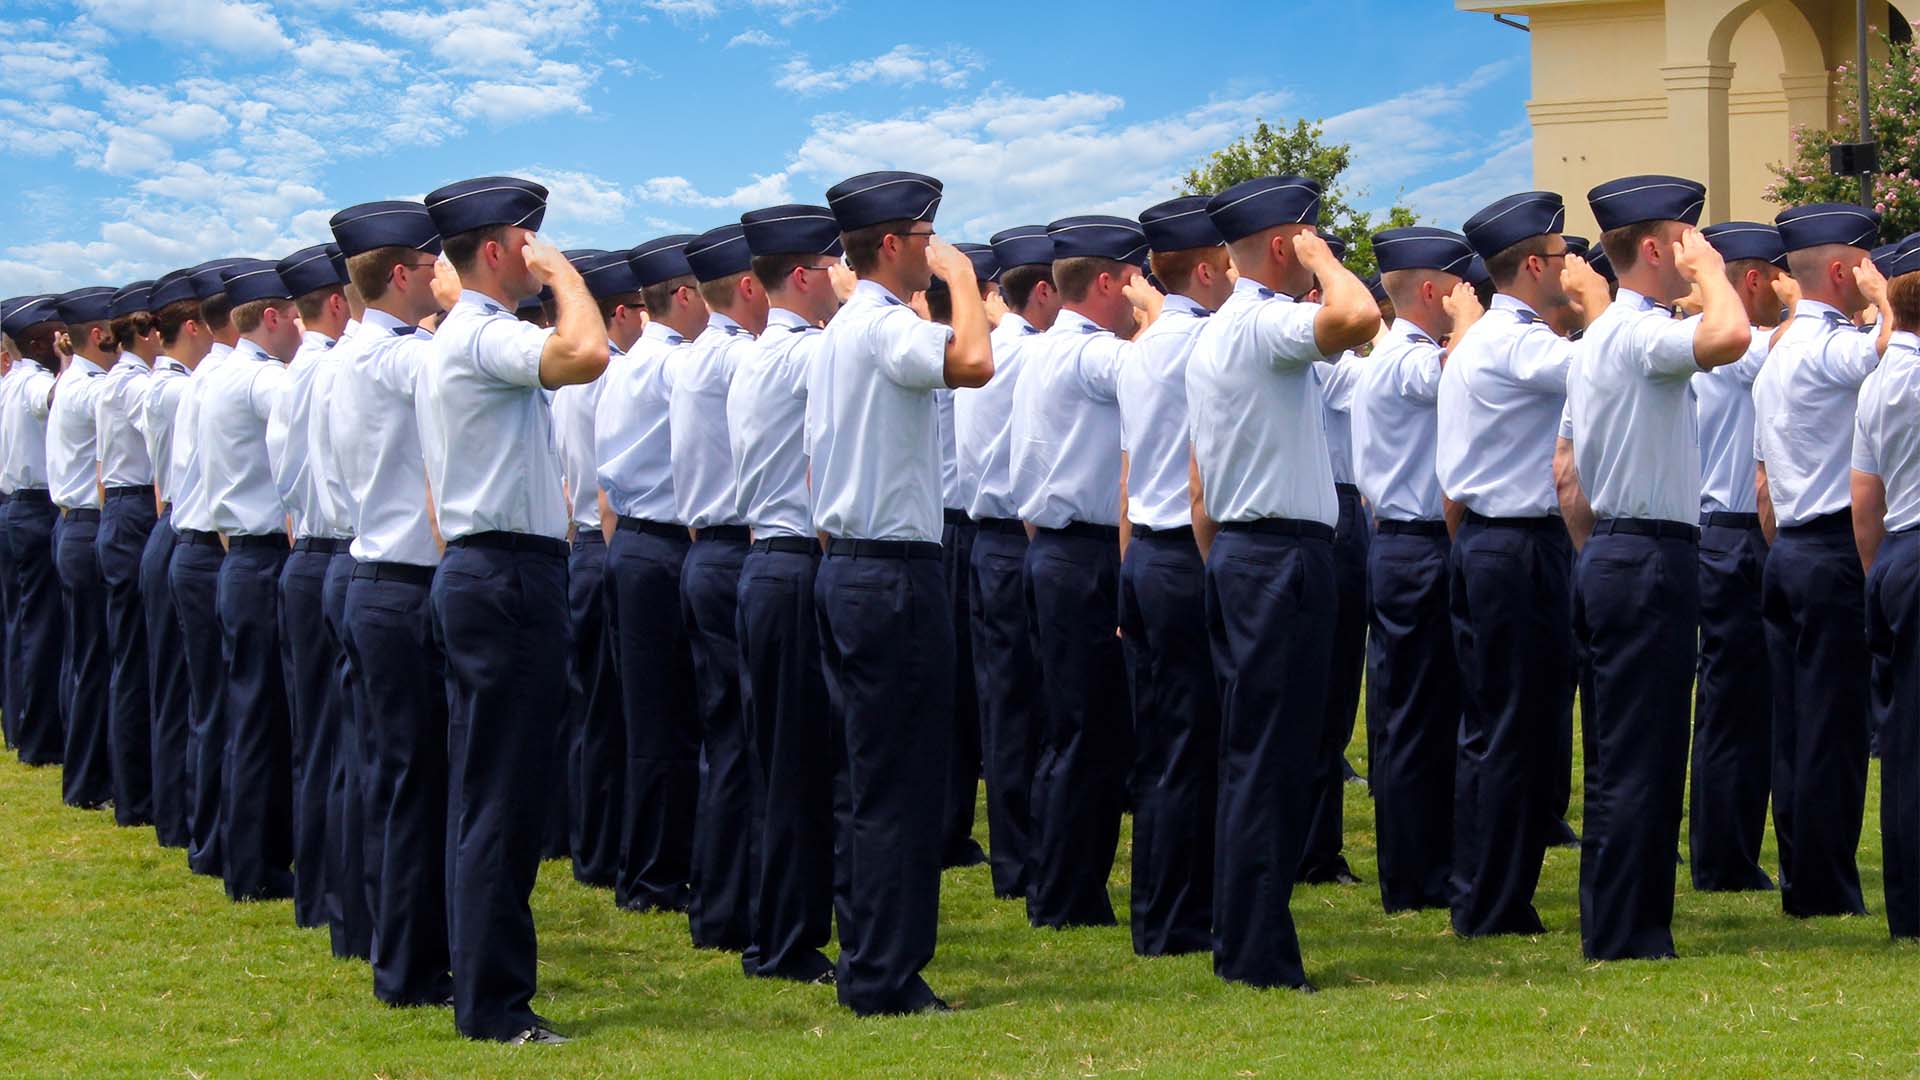 Formation of Airman saluting outside